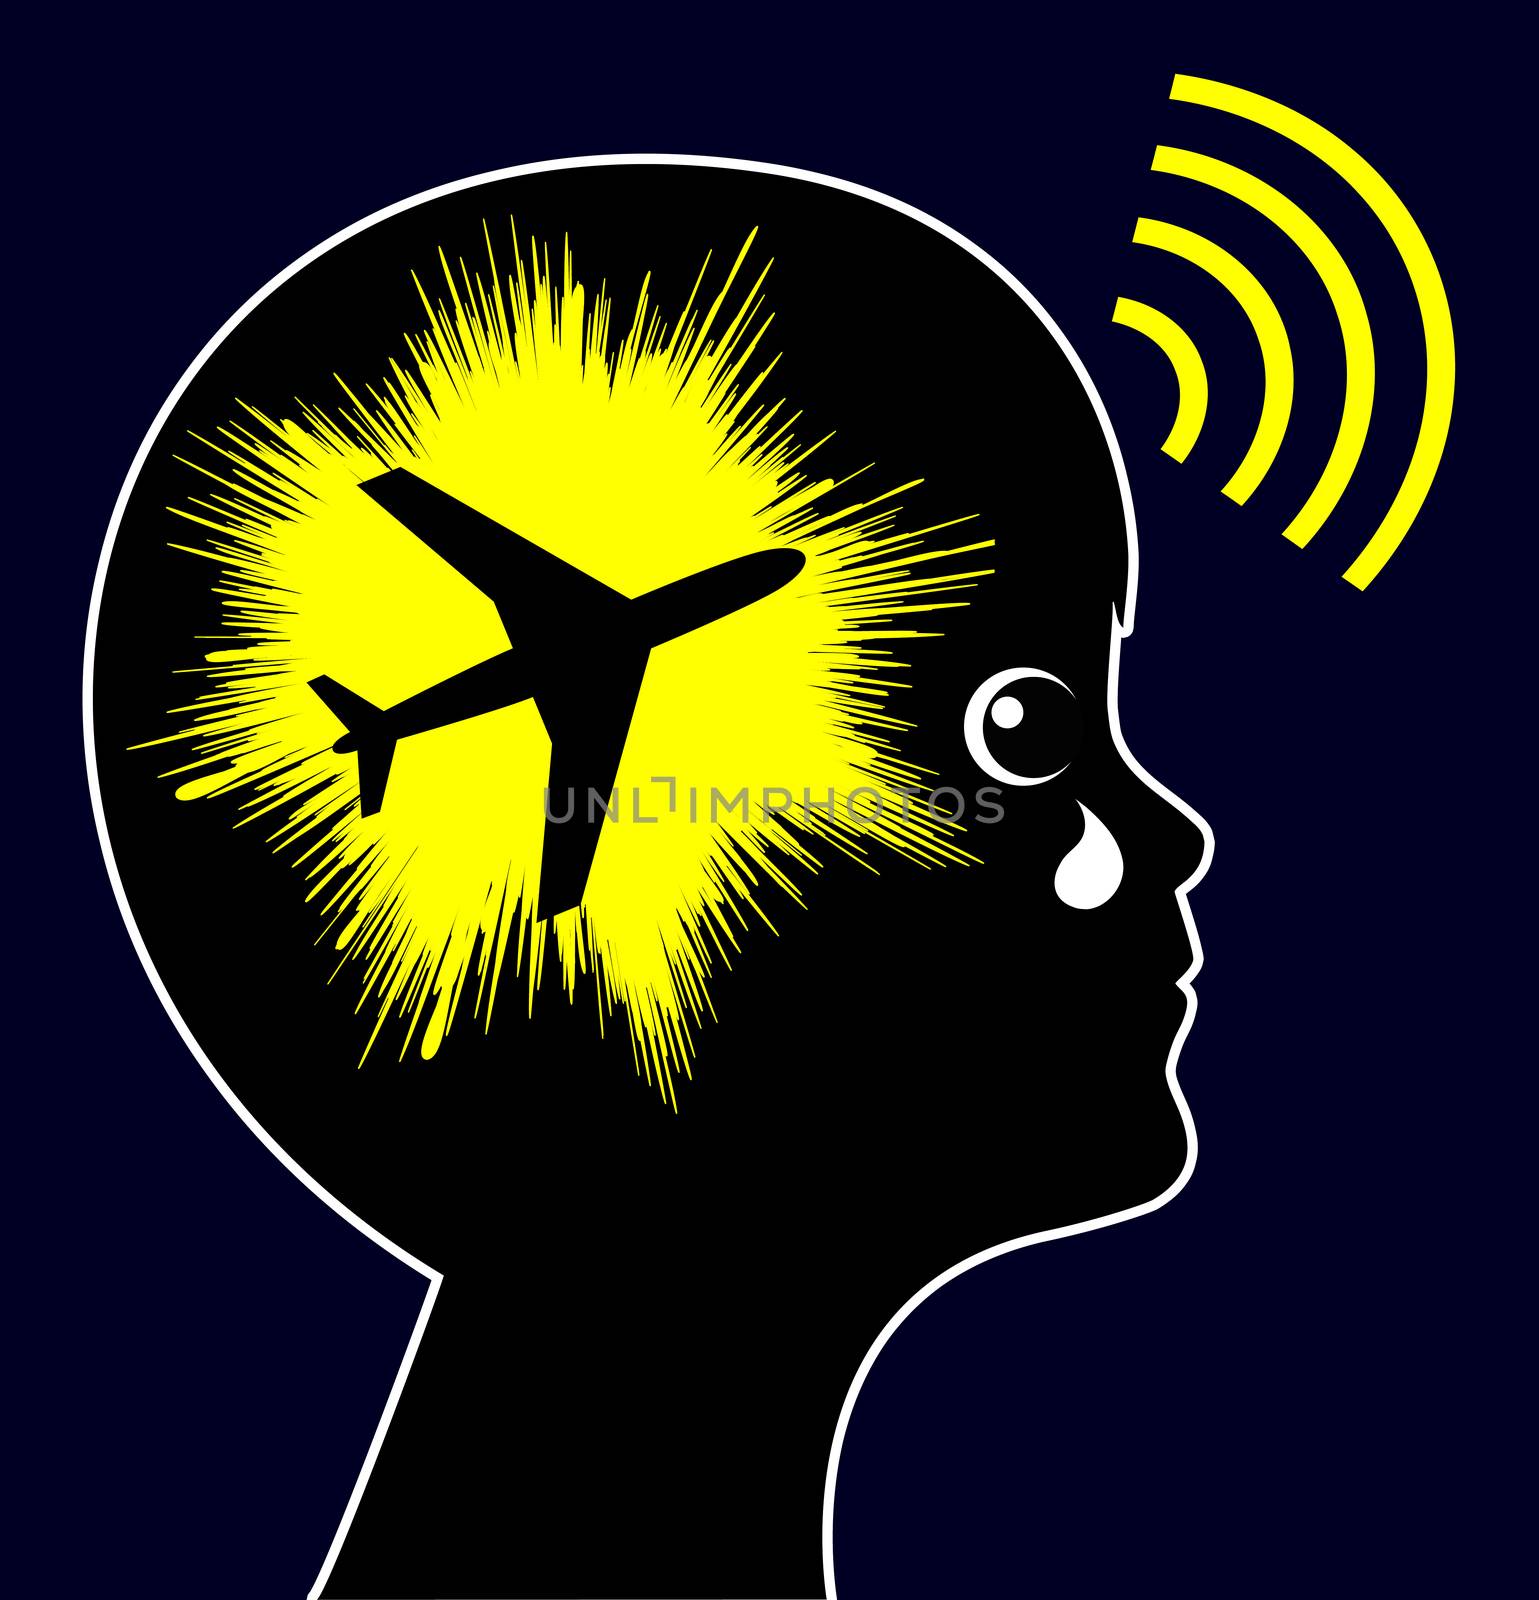 Noise pollution from airports have negative impact on the health of children